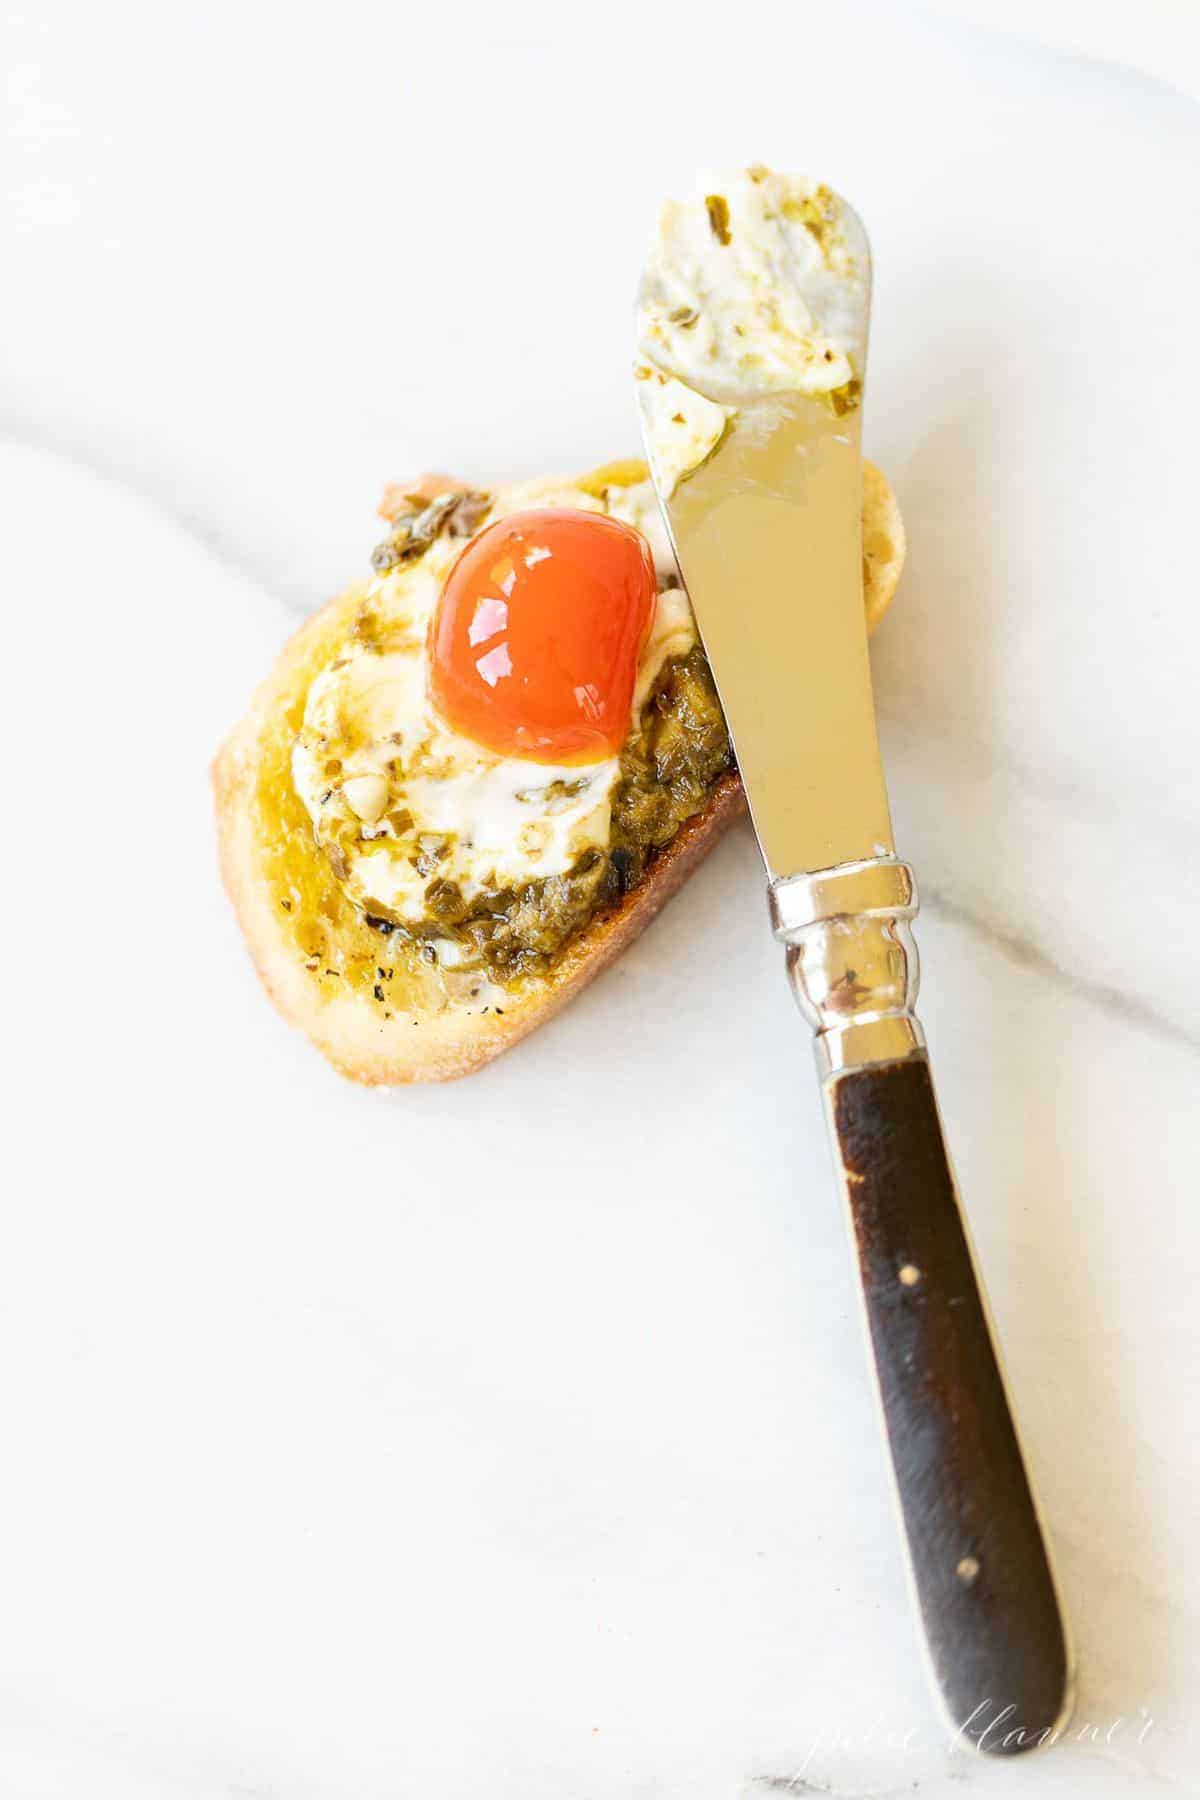 Marble surface, single slice of crostini topped with pesto cheese dip and a cherry tomato, spreader on top.